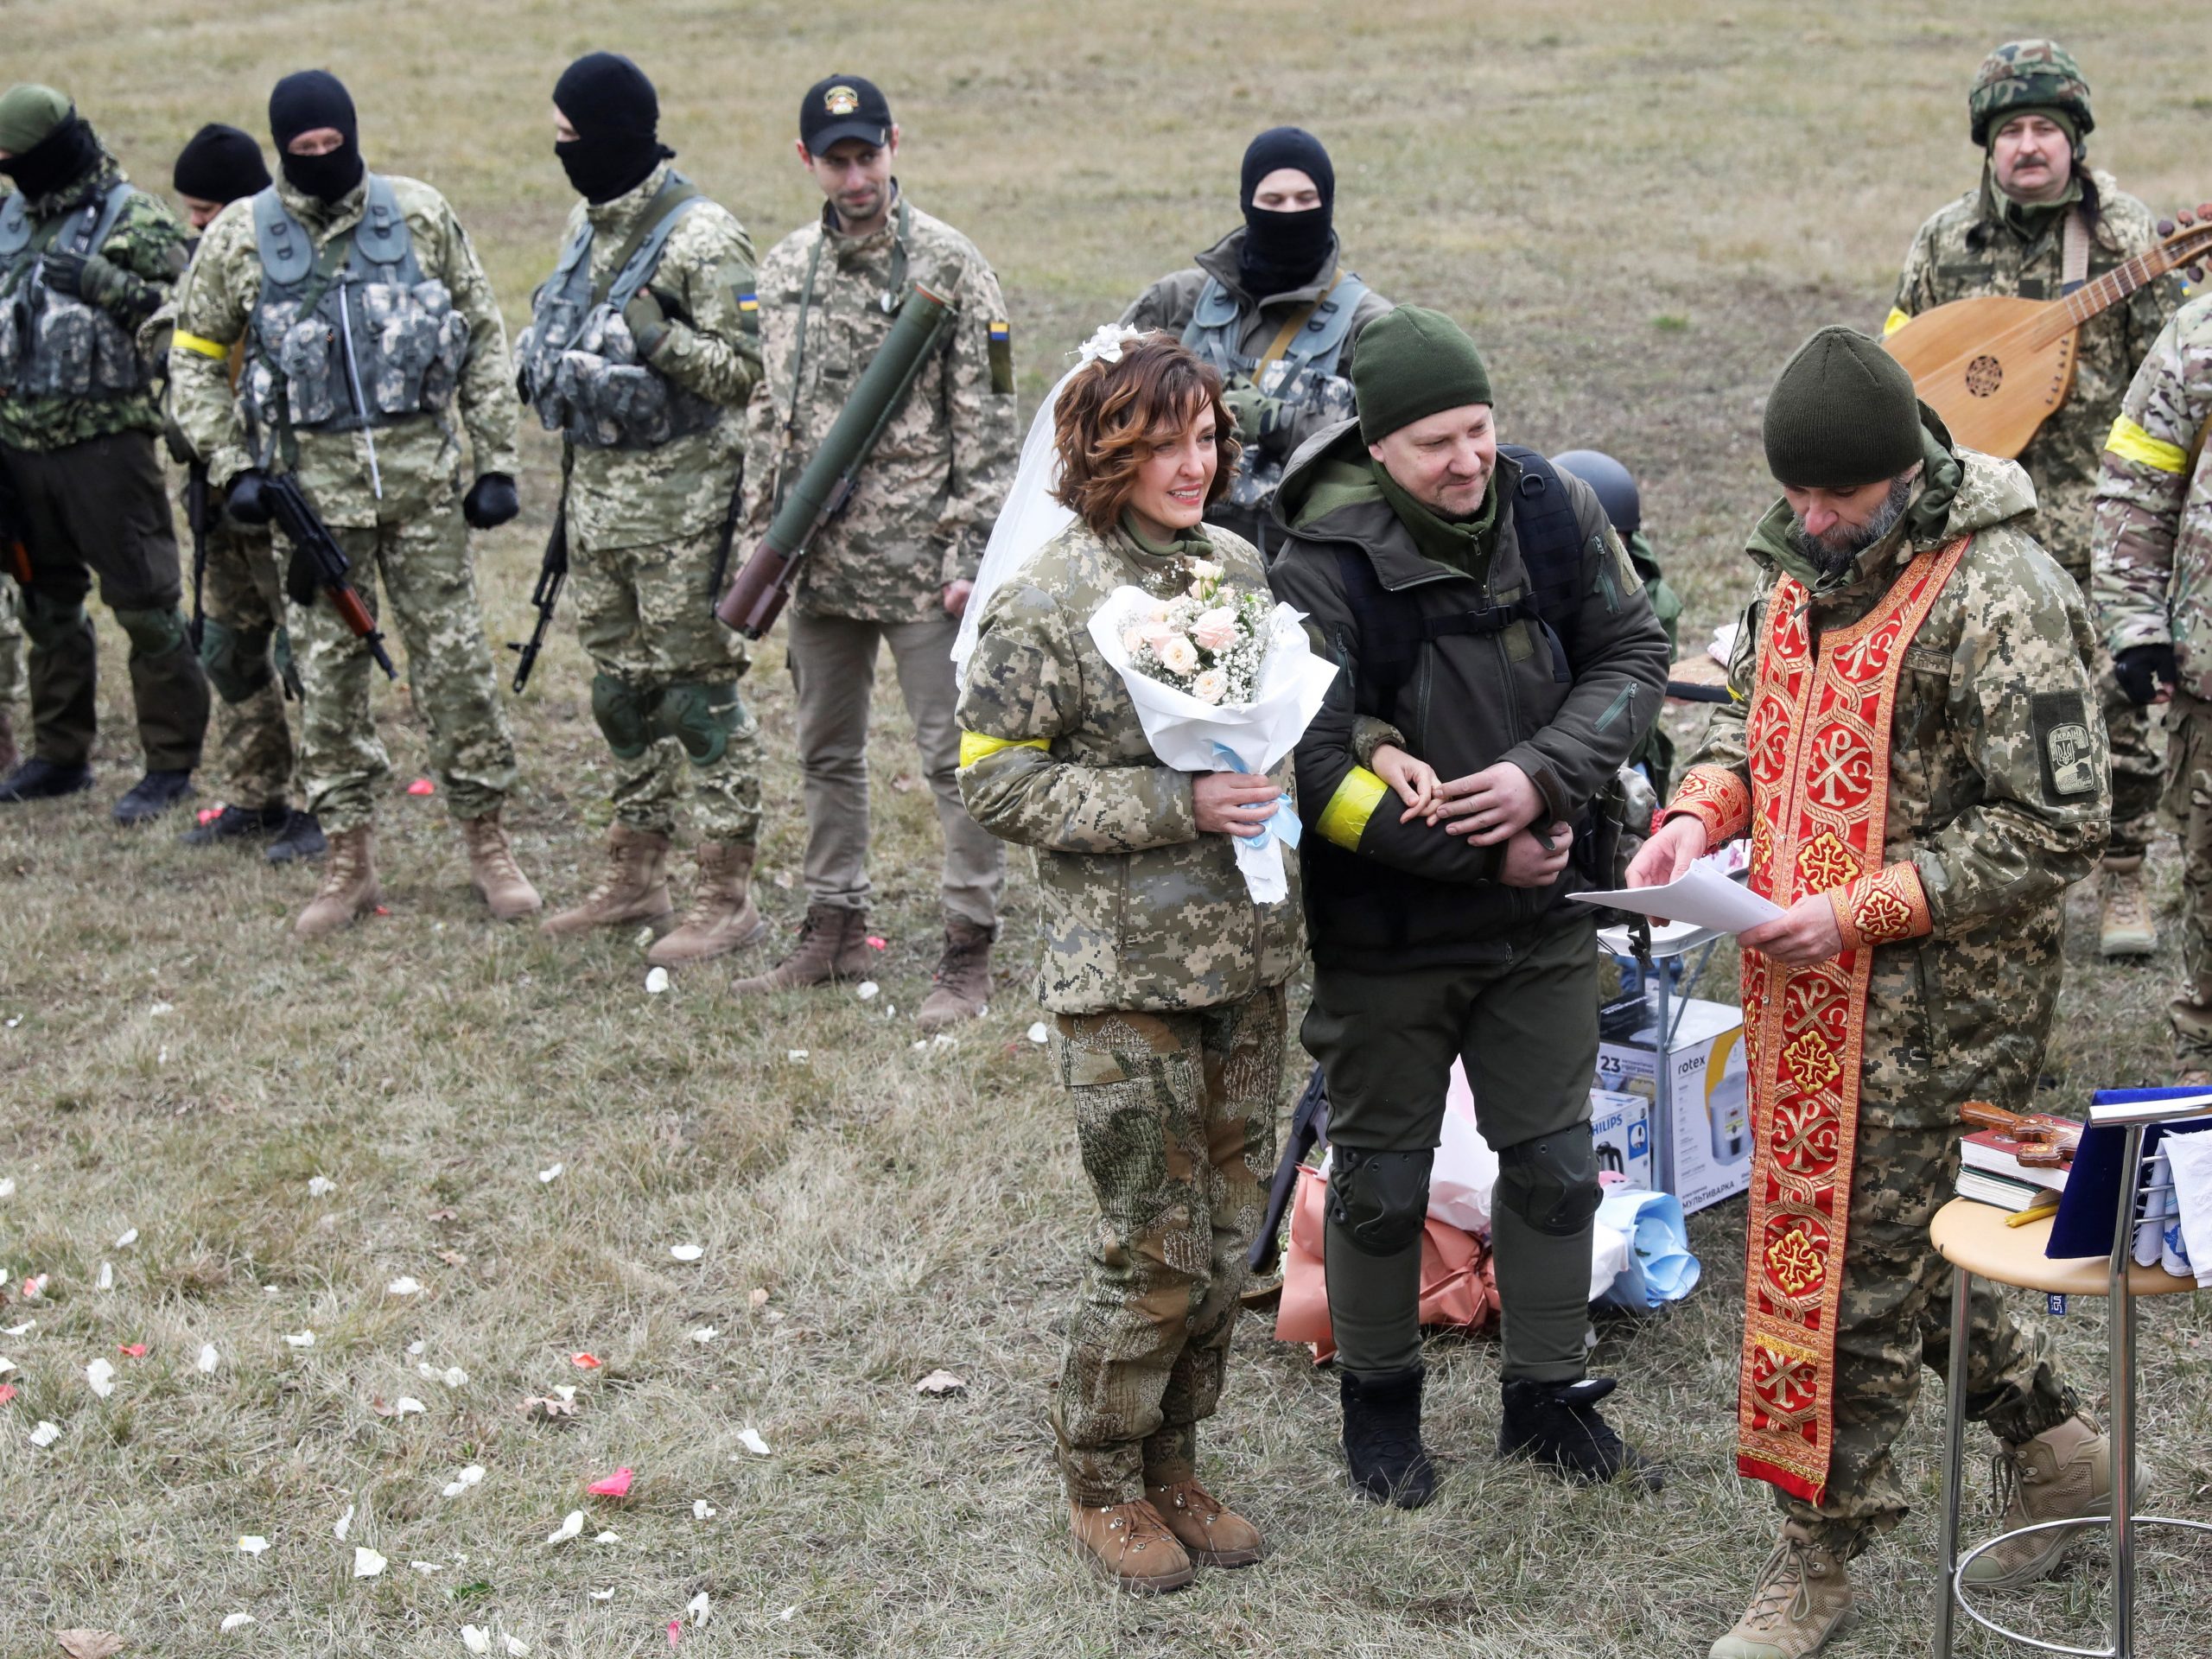 Members of the Ukrainian Territorial Defence Forces got married at a checkpoint in Kyiv.